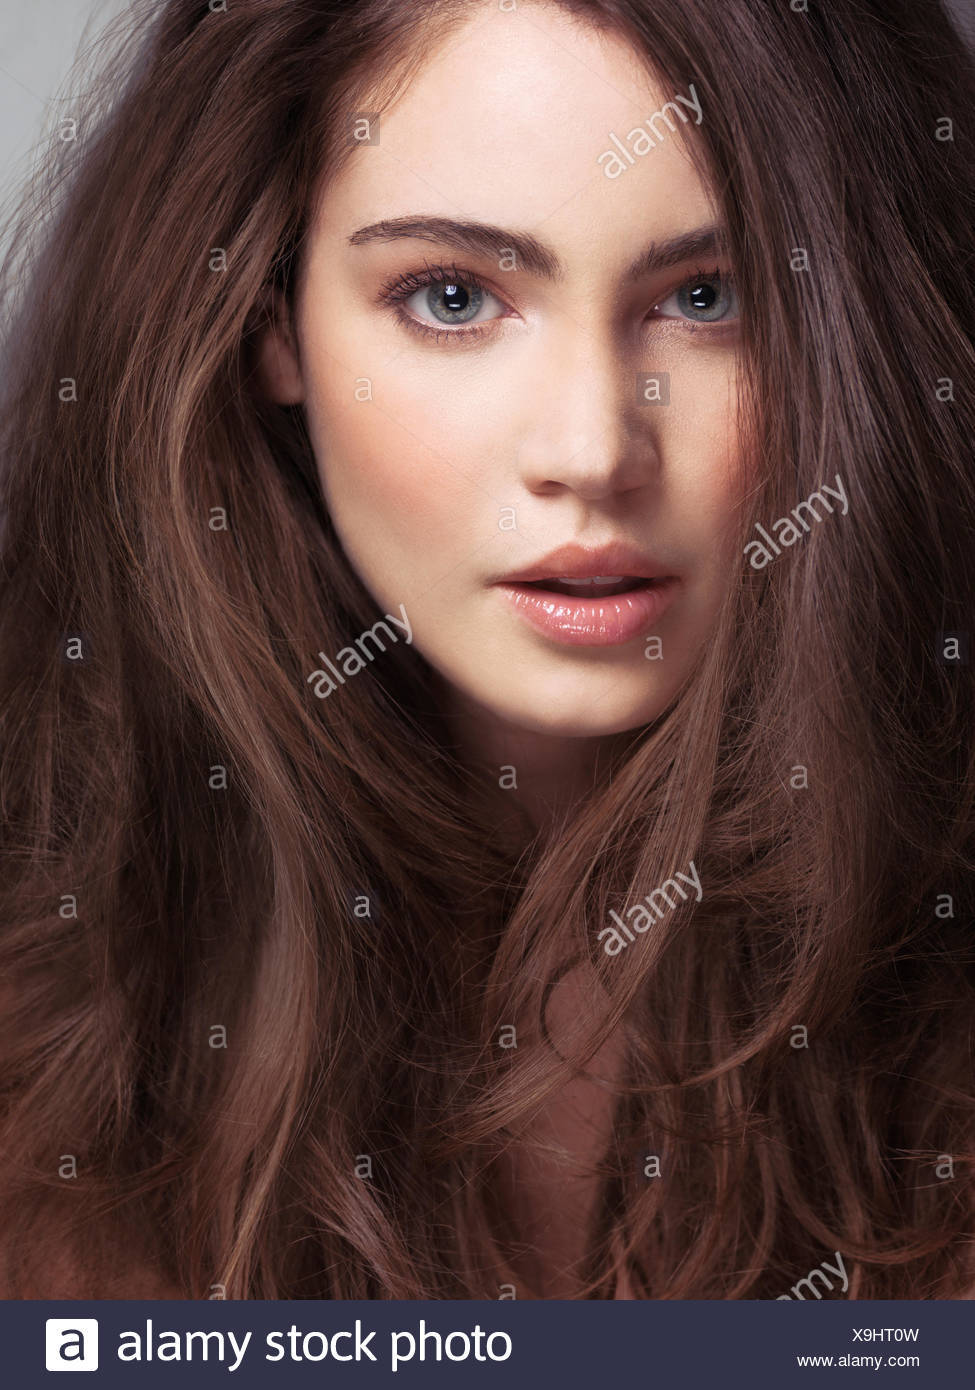 Beauty Face Portrait Of Young Woman With Long Brown Hair And Gray Eyes Front View Stock Photo Alamy